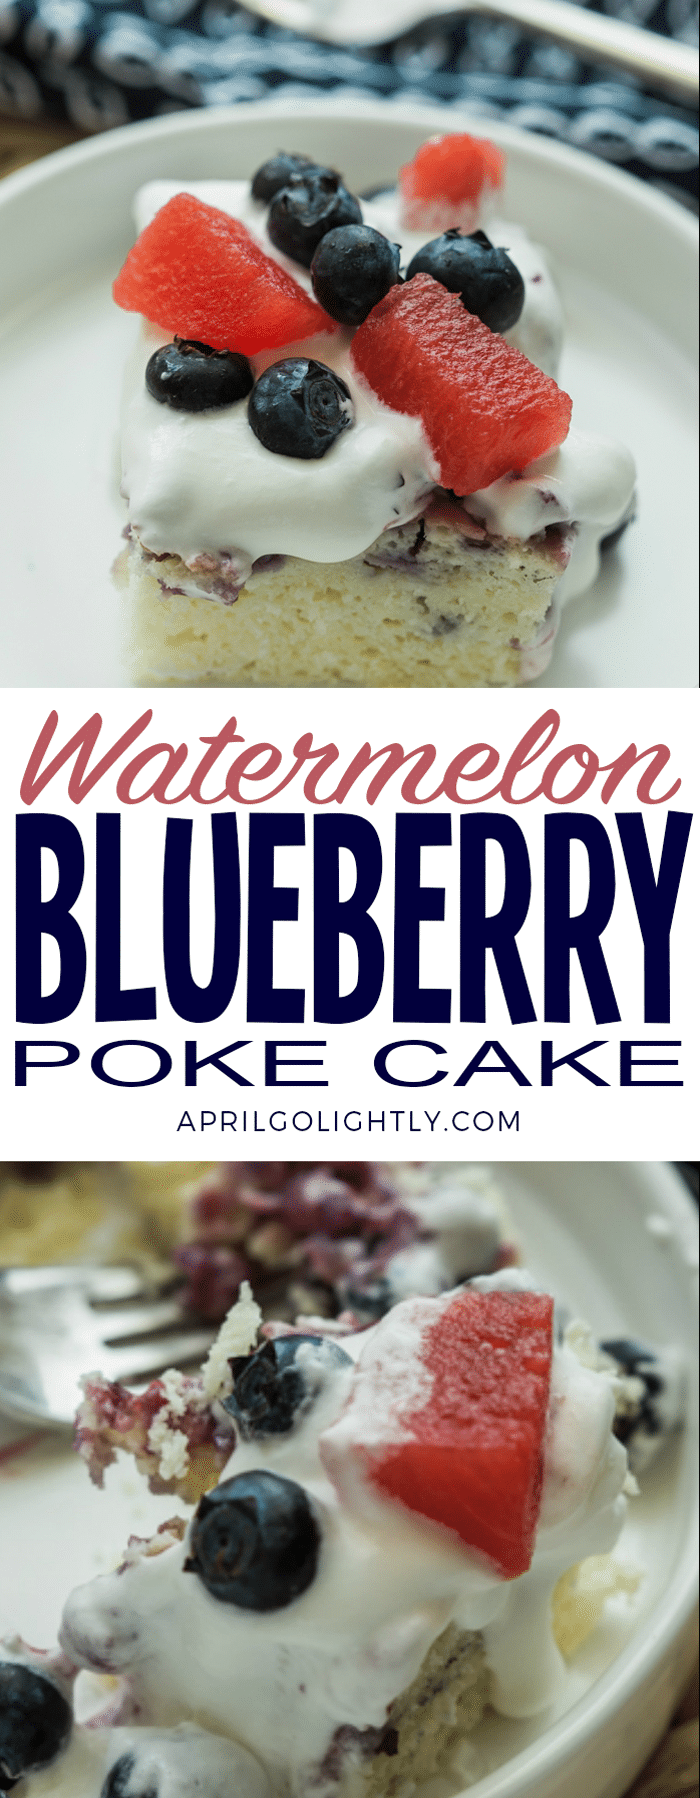 Easy Watermelon Blueberry Poke Cake Recipe made with Fresh from Florida fruits made with homemade whipped cream - perfect for a summer dessert